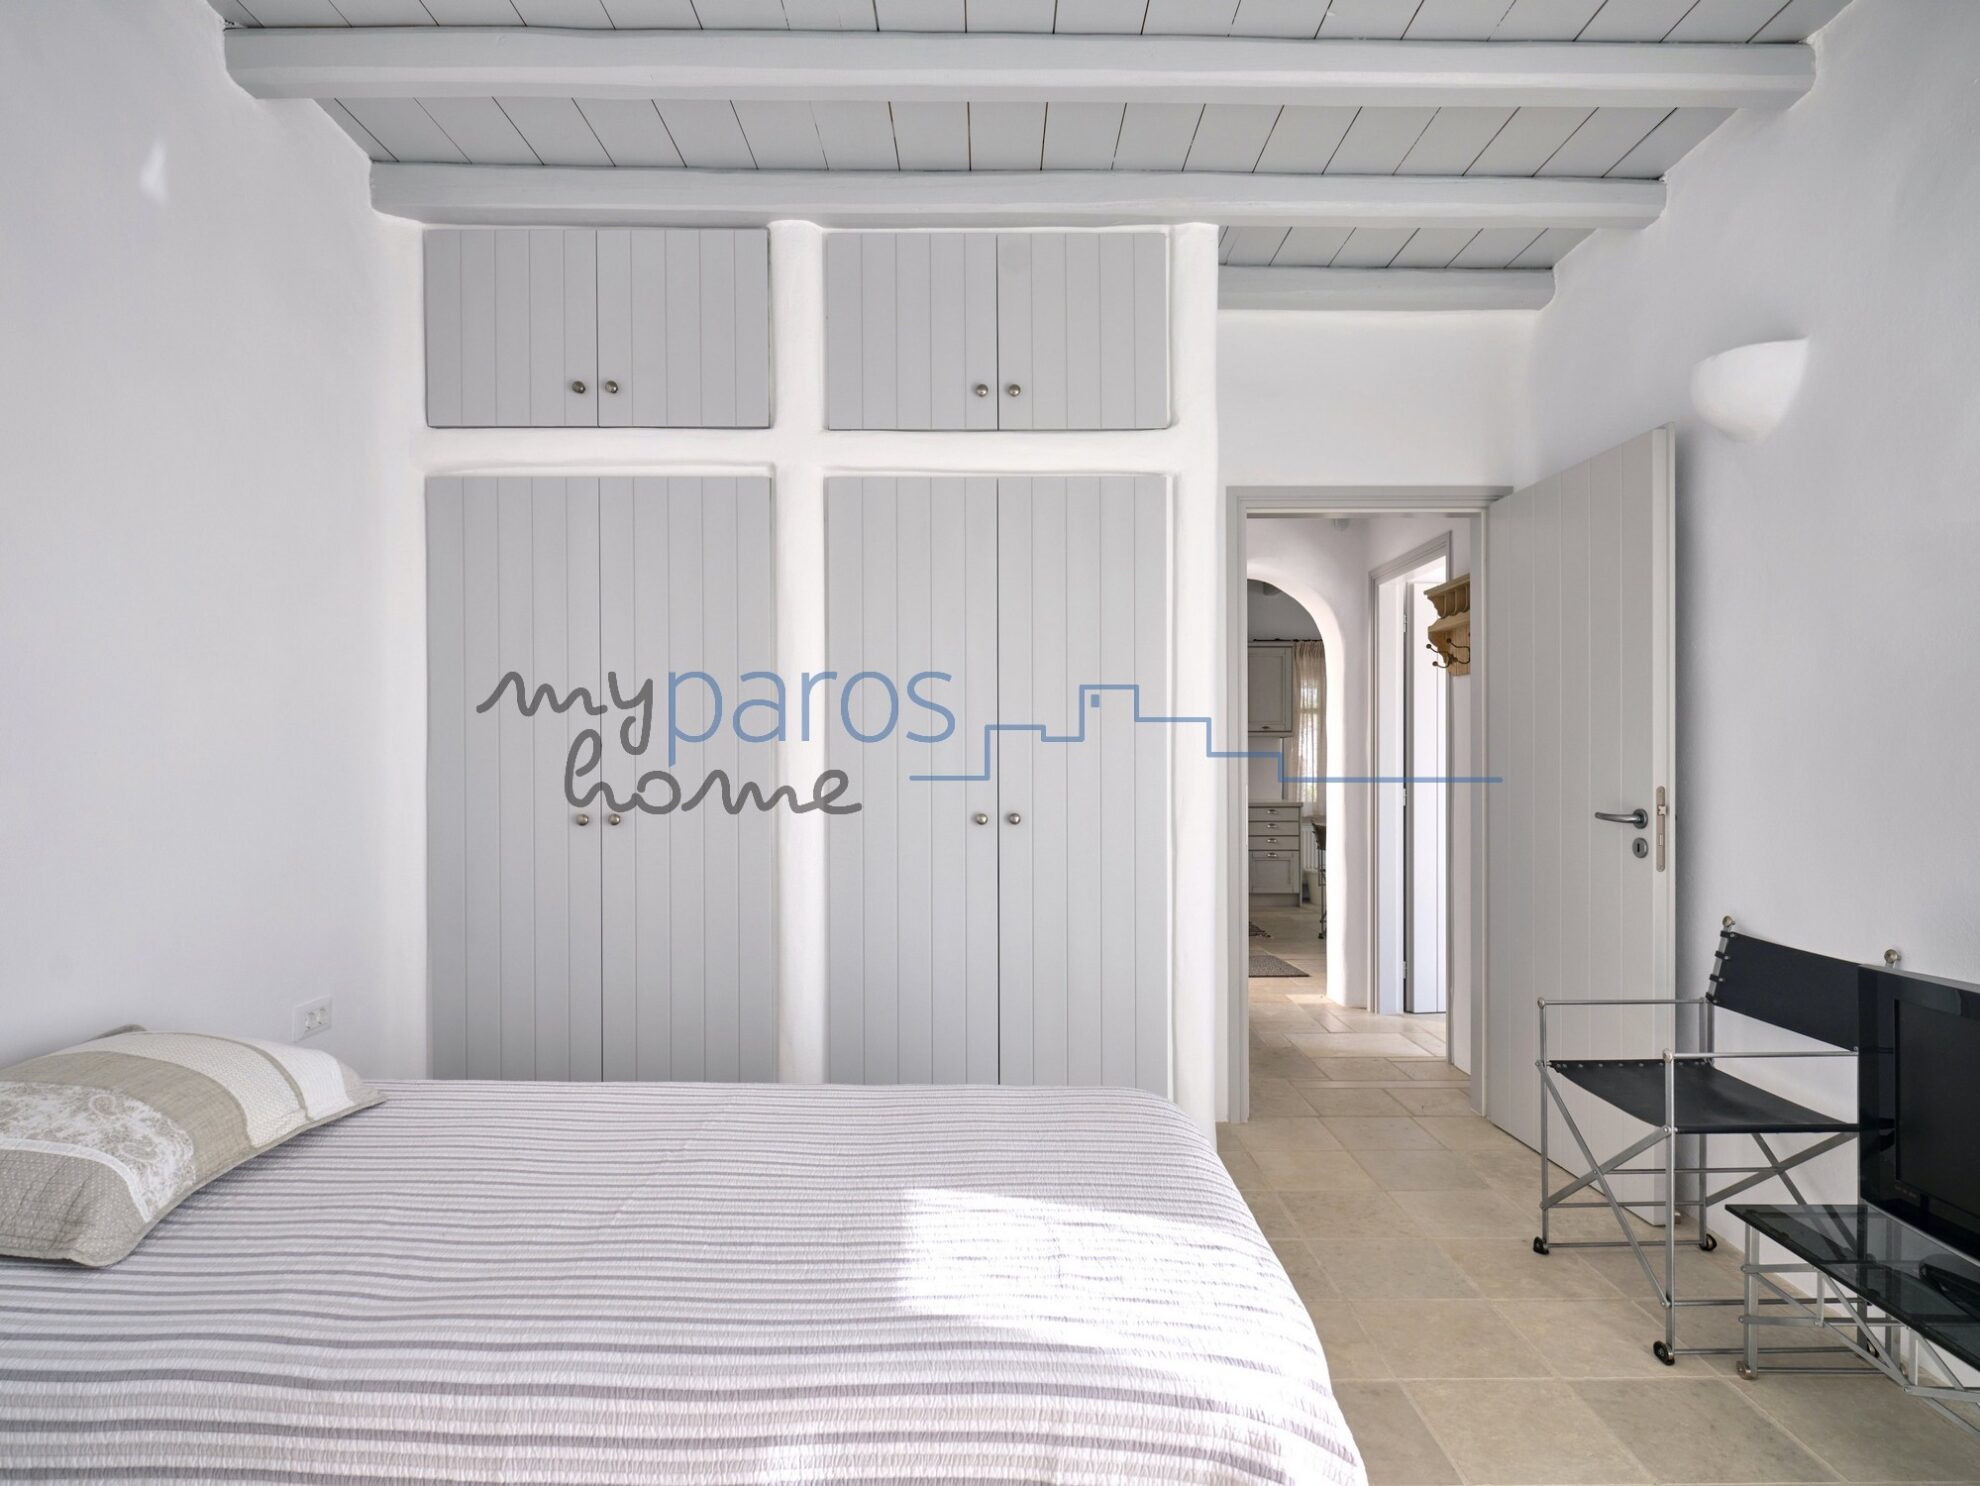 Greece Sotheby's Int. Realty - Paros - Catrice19